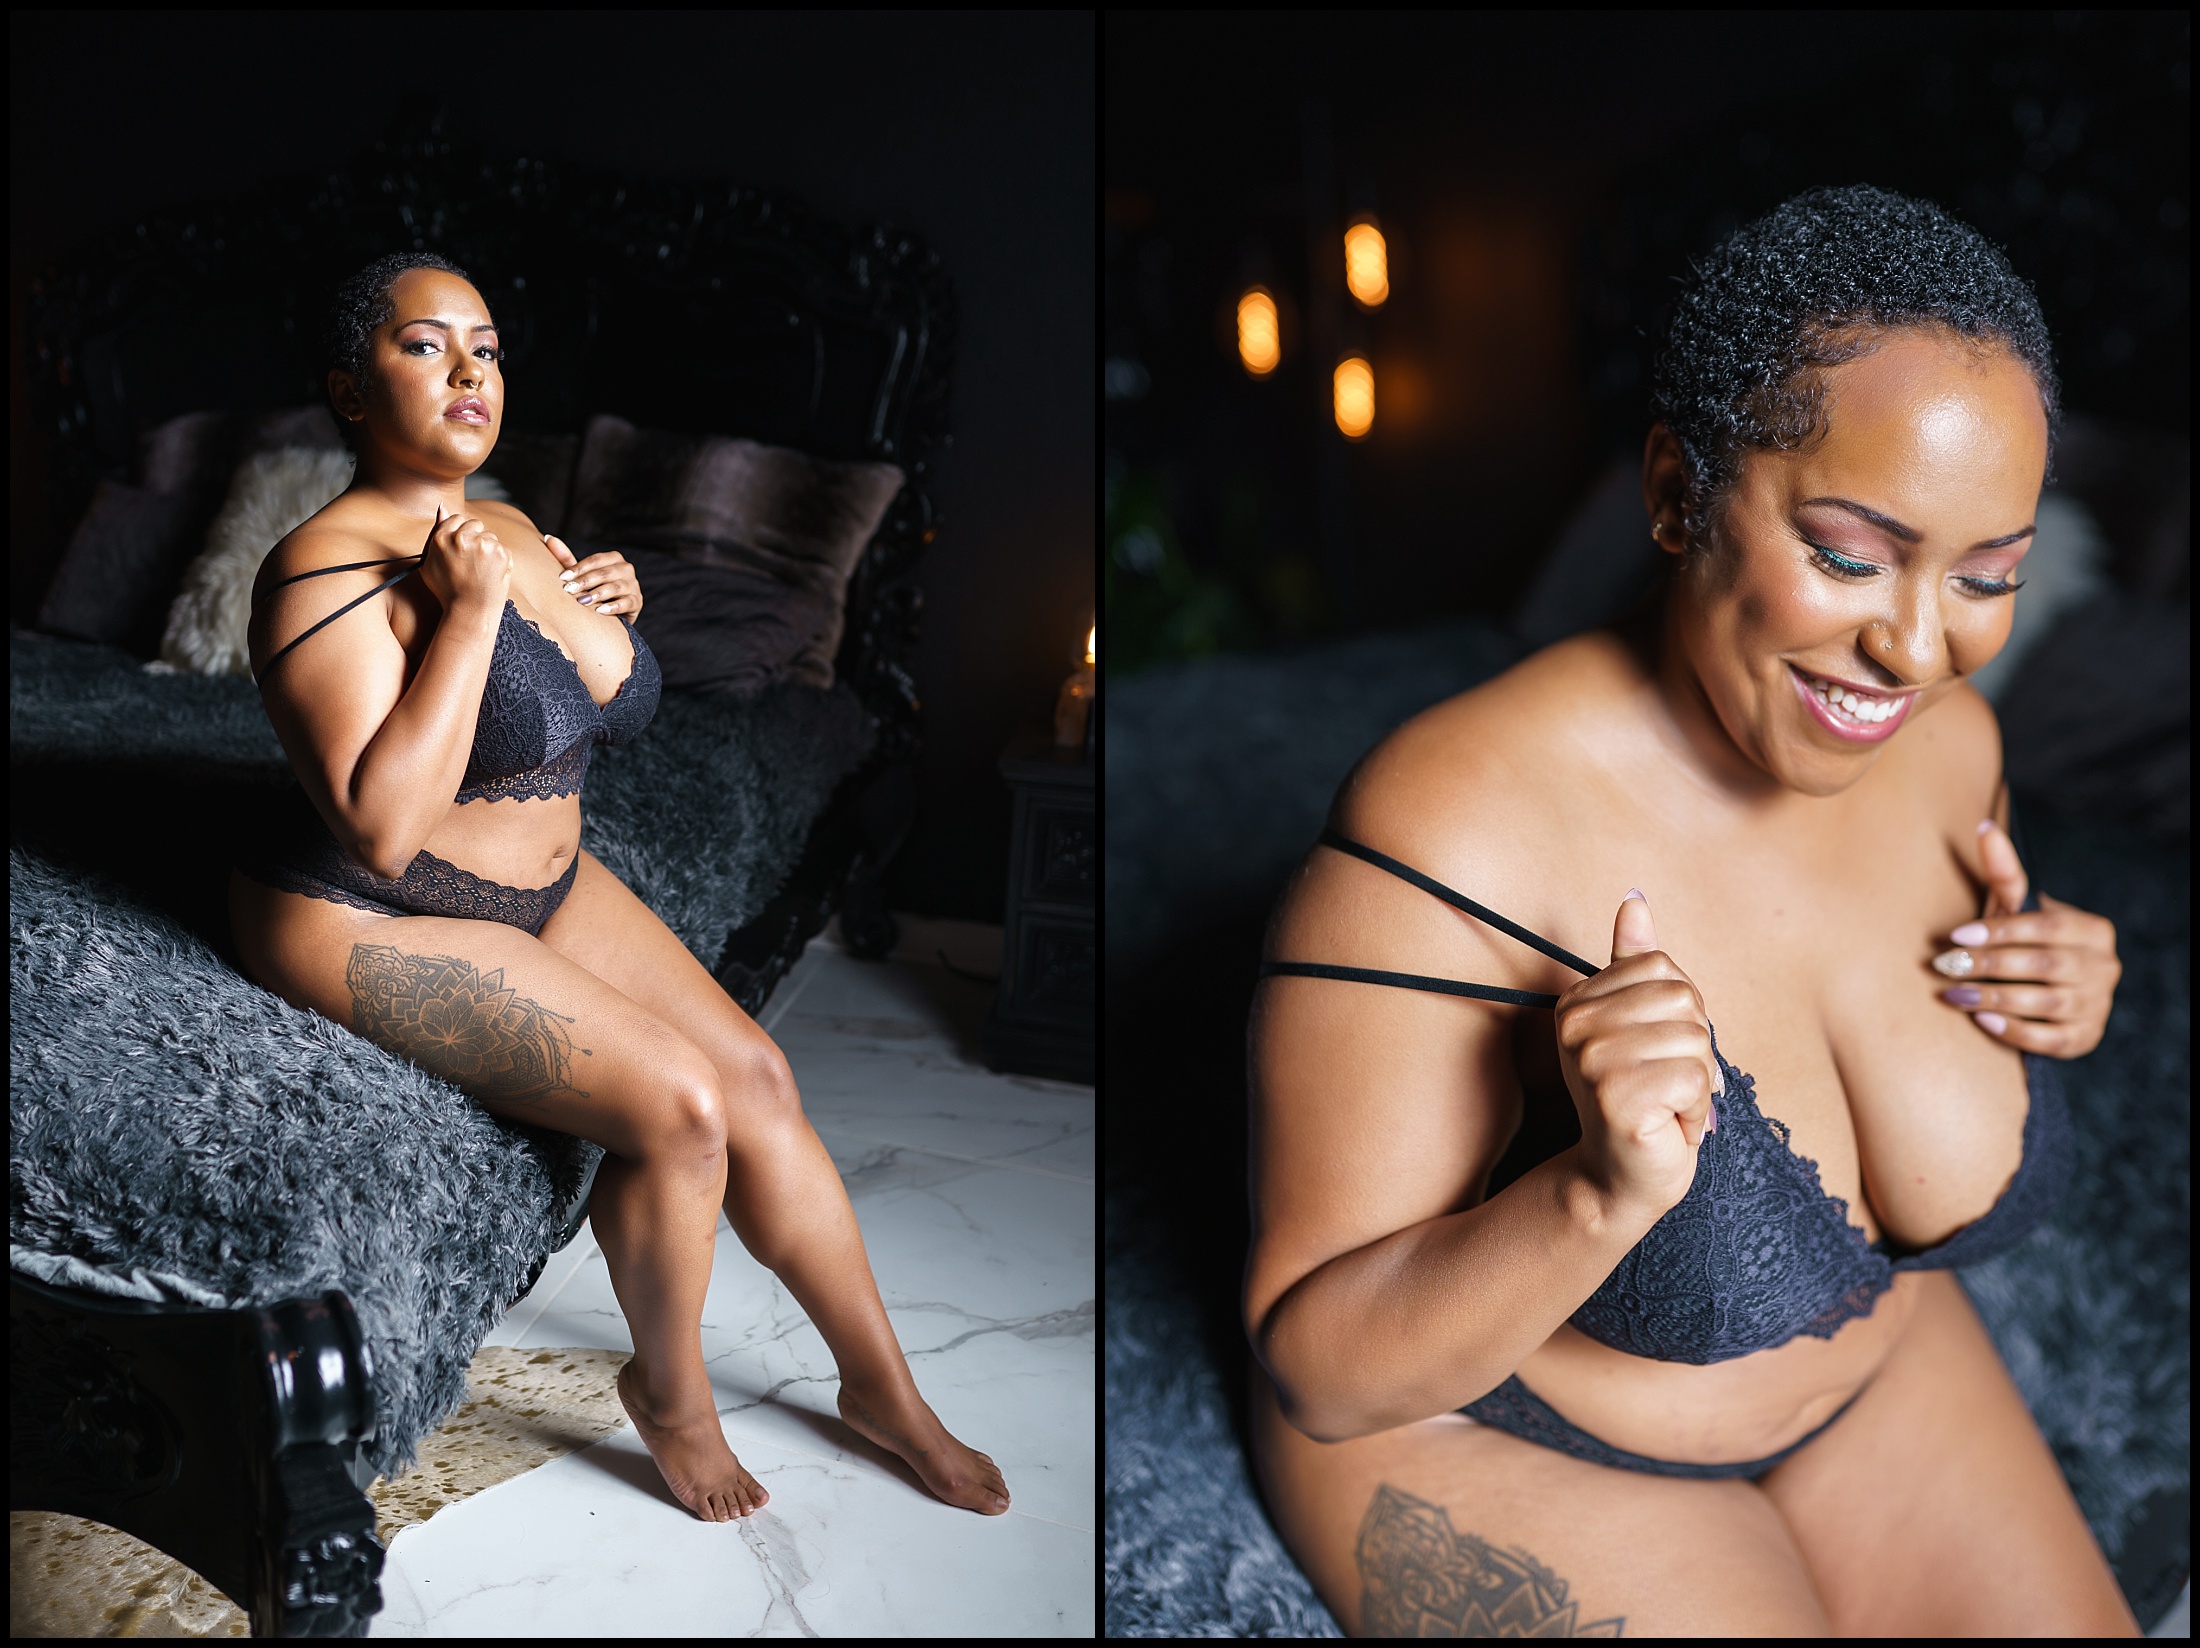 Mx D models plus size lingerie from Lux In Tenebris Intimates during their downtown Norfolk Boudoir Photograpy experience with LeZandra Photography